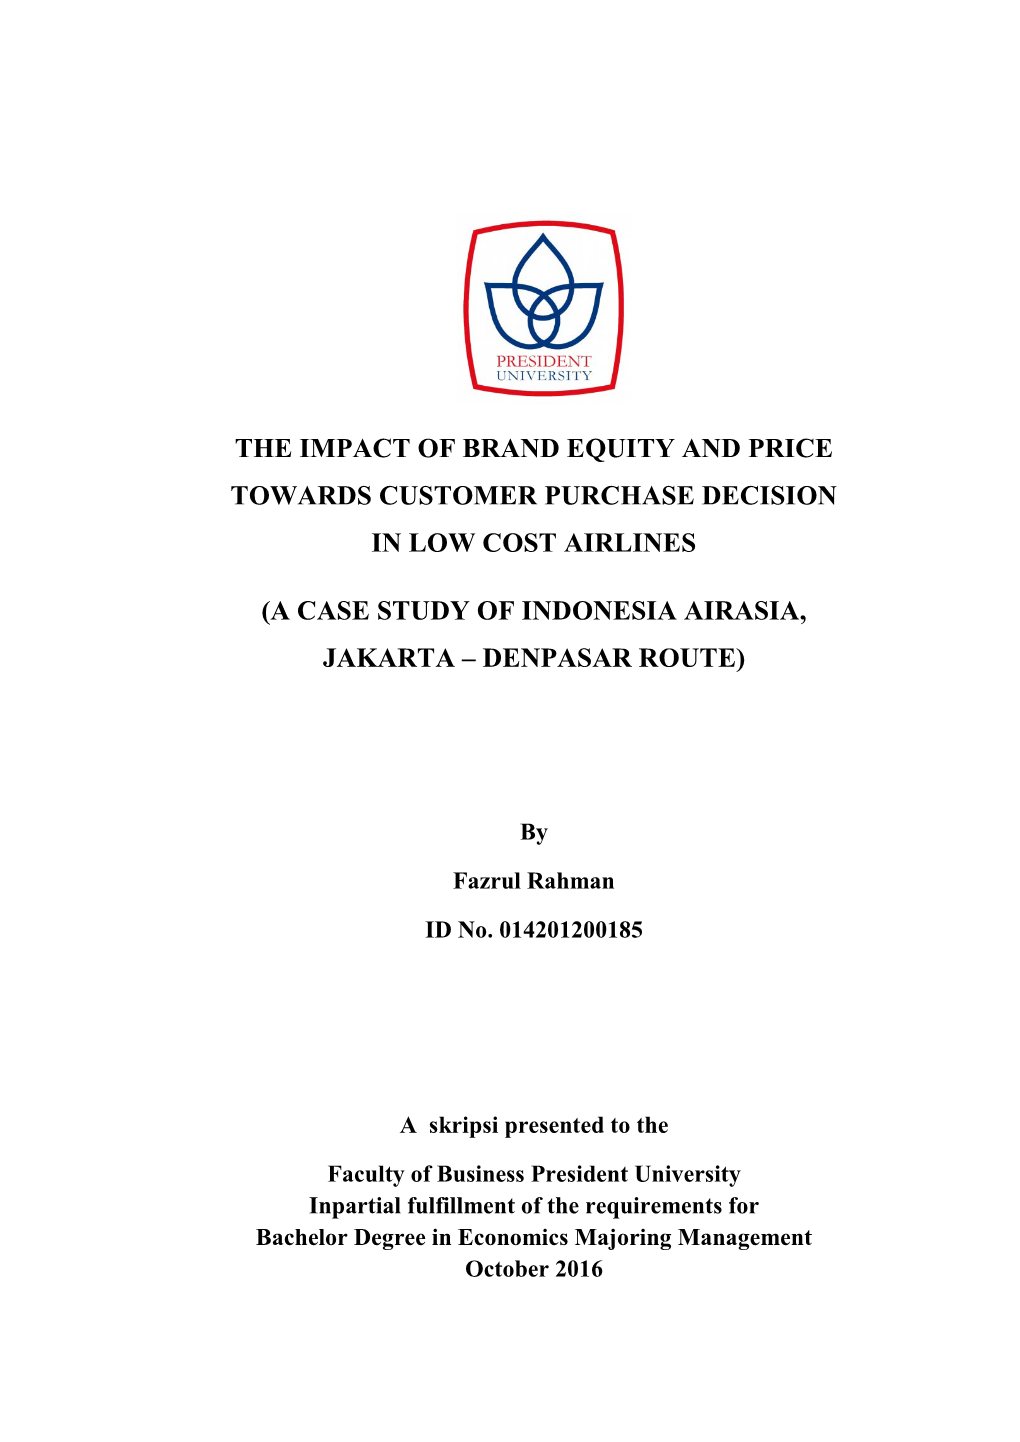 The Impact of Brand Equity and Price Towards Customer Purchase Decision in Low Cost Airlines